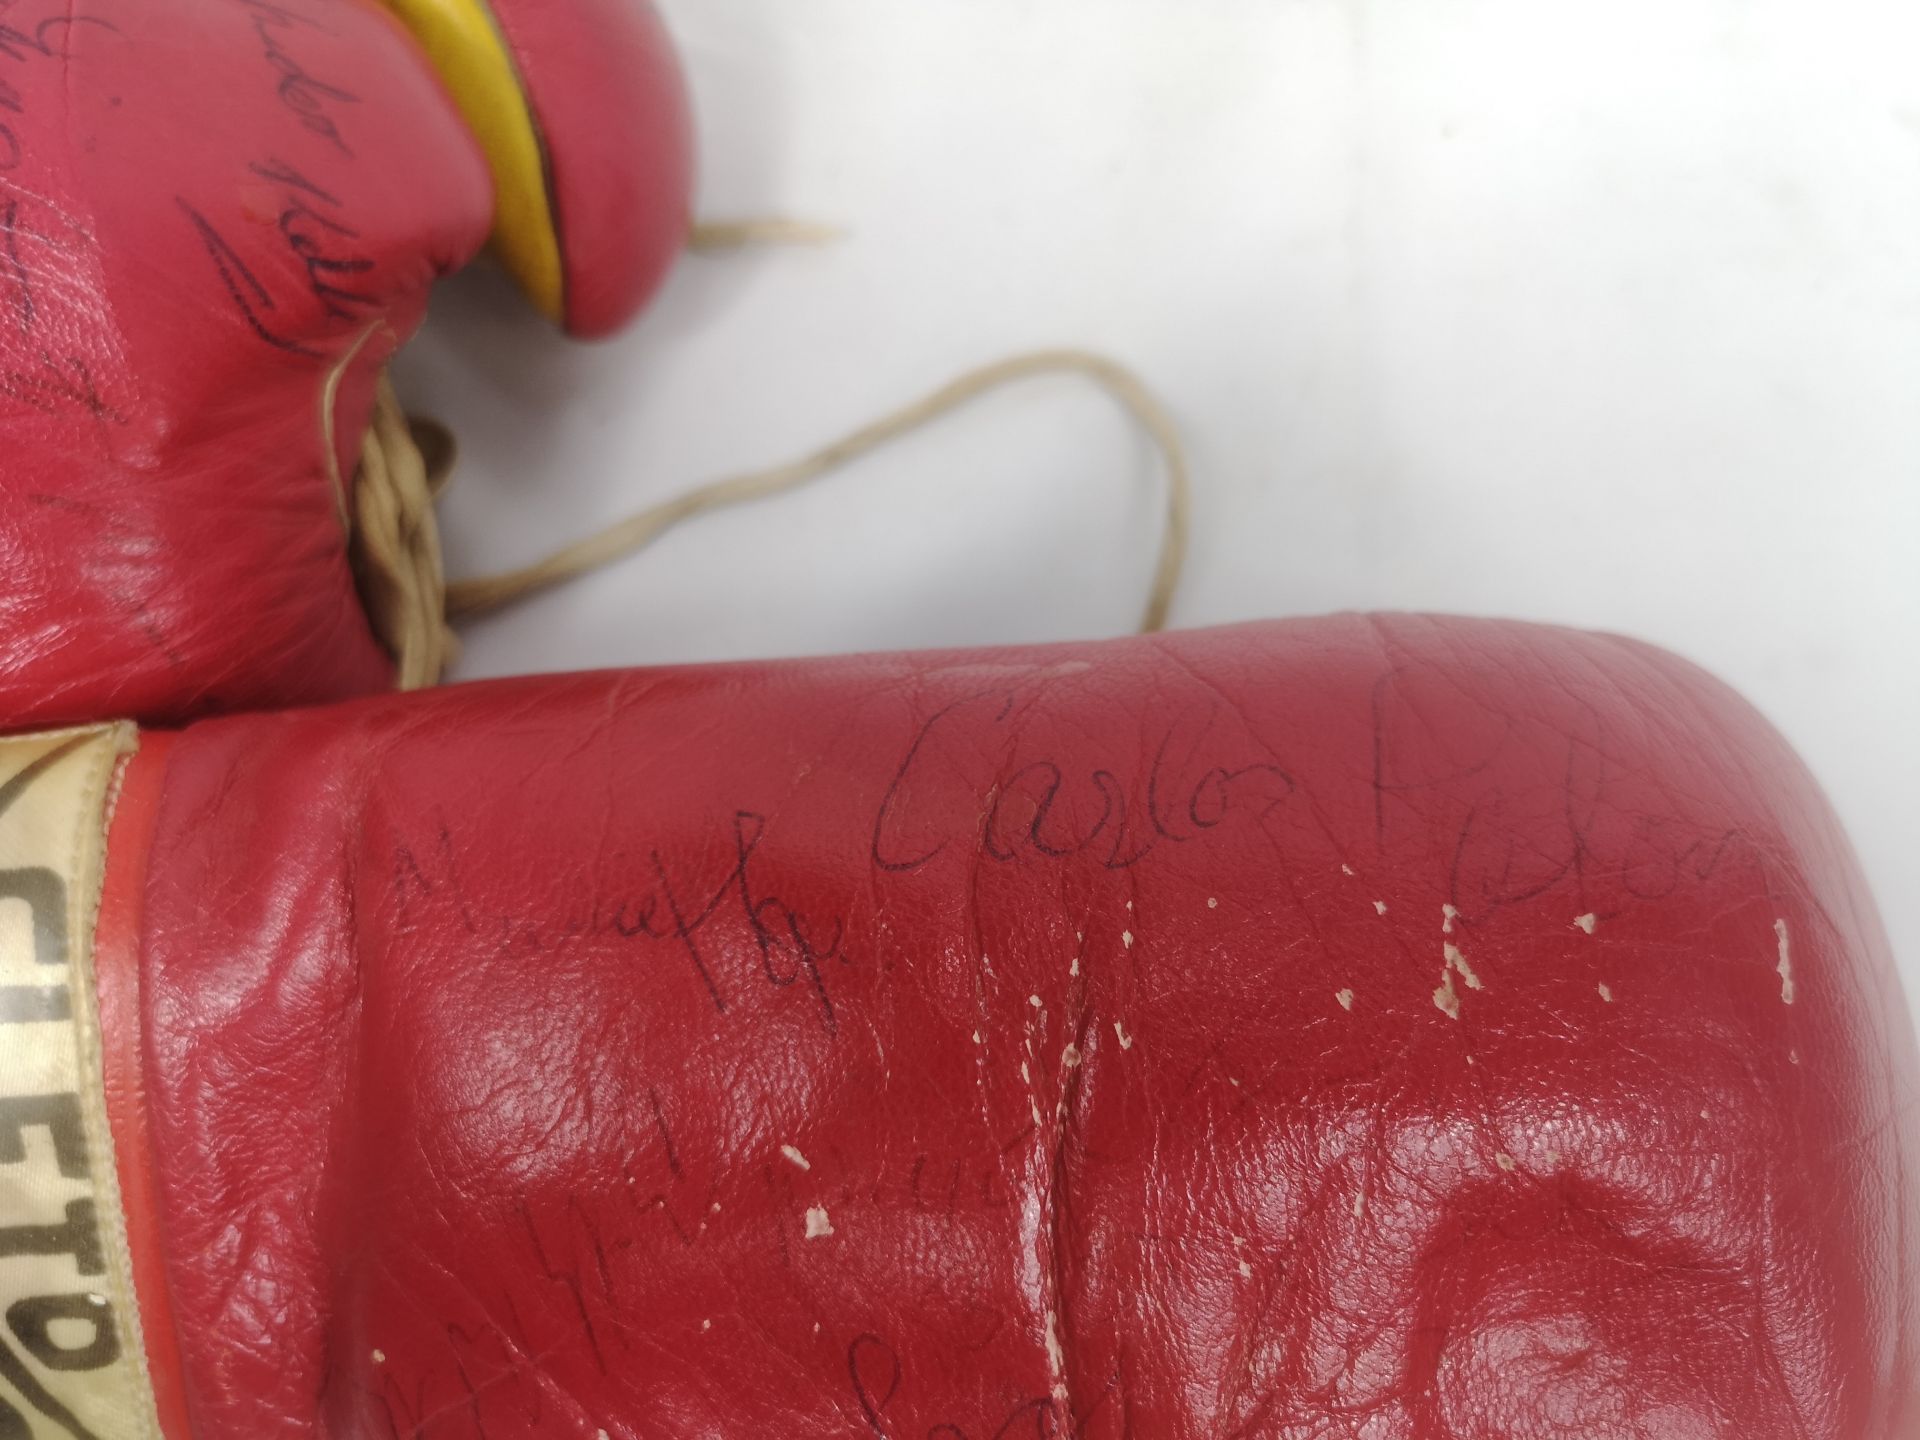 Pair of signed Cleto Reyes boxing gloves with approximately 17 signatures. - Image 7 of 9